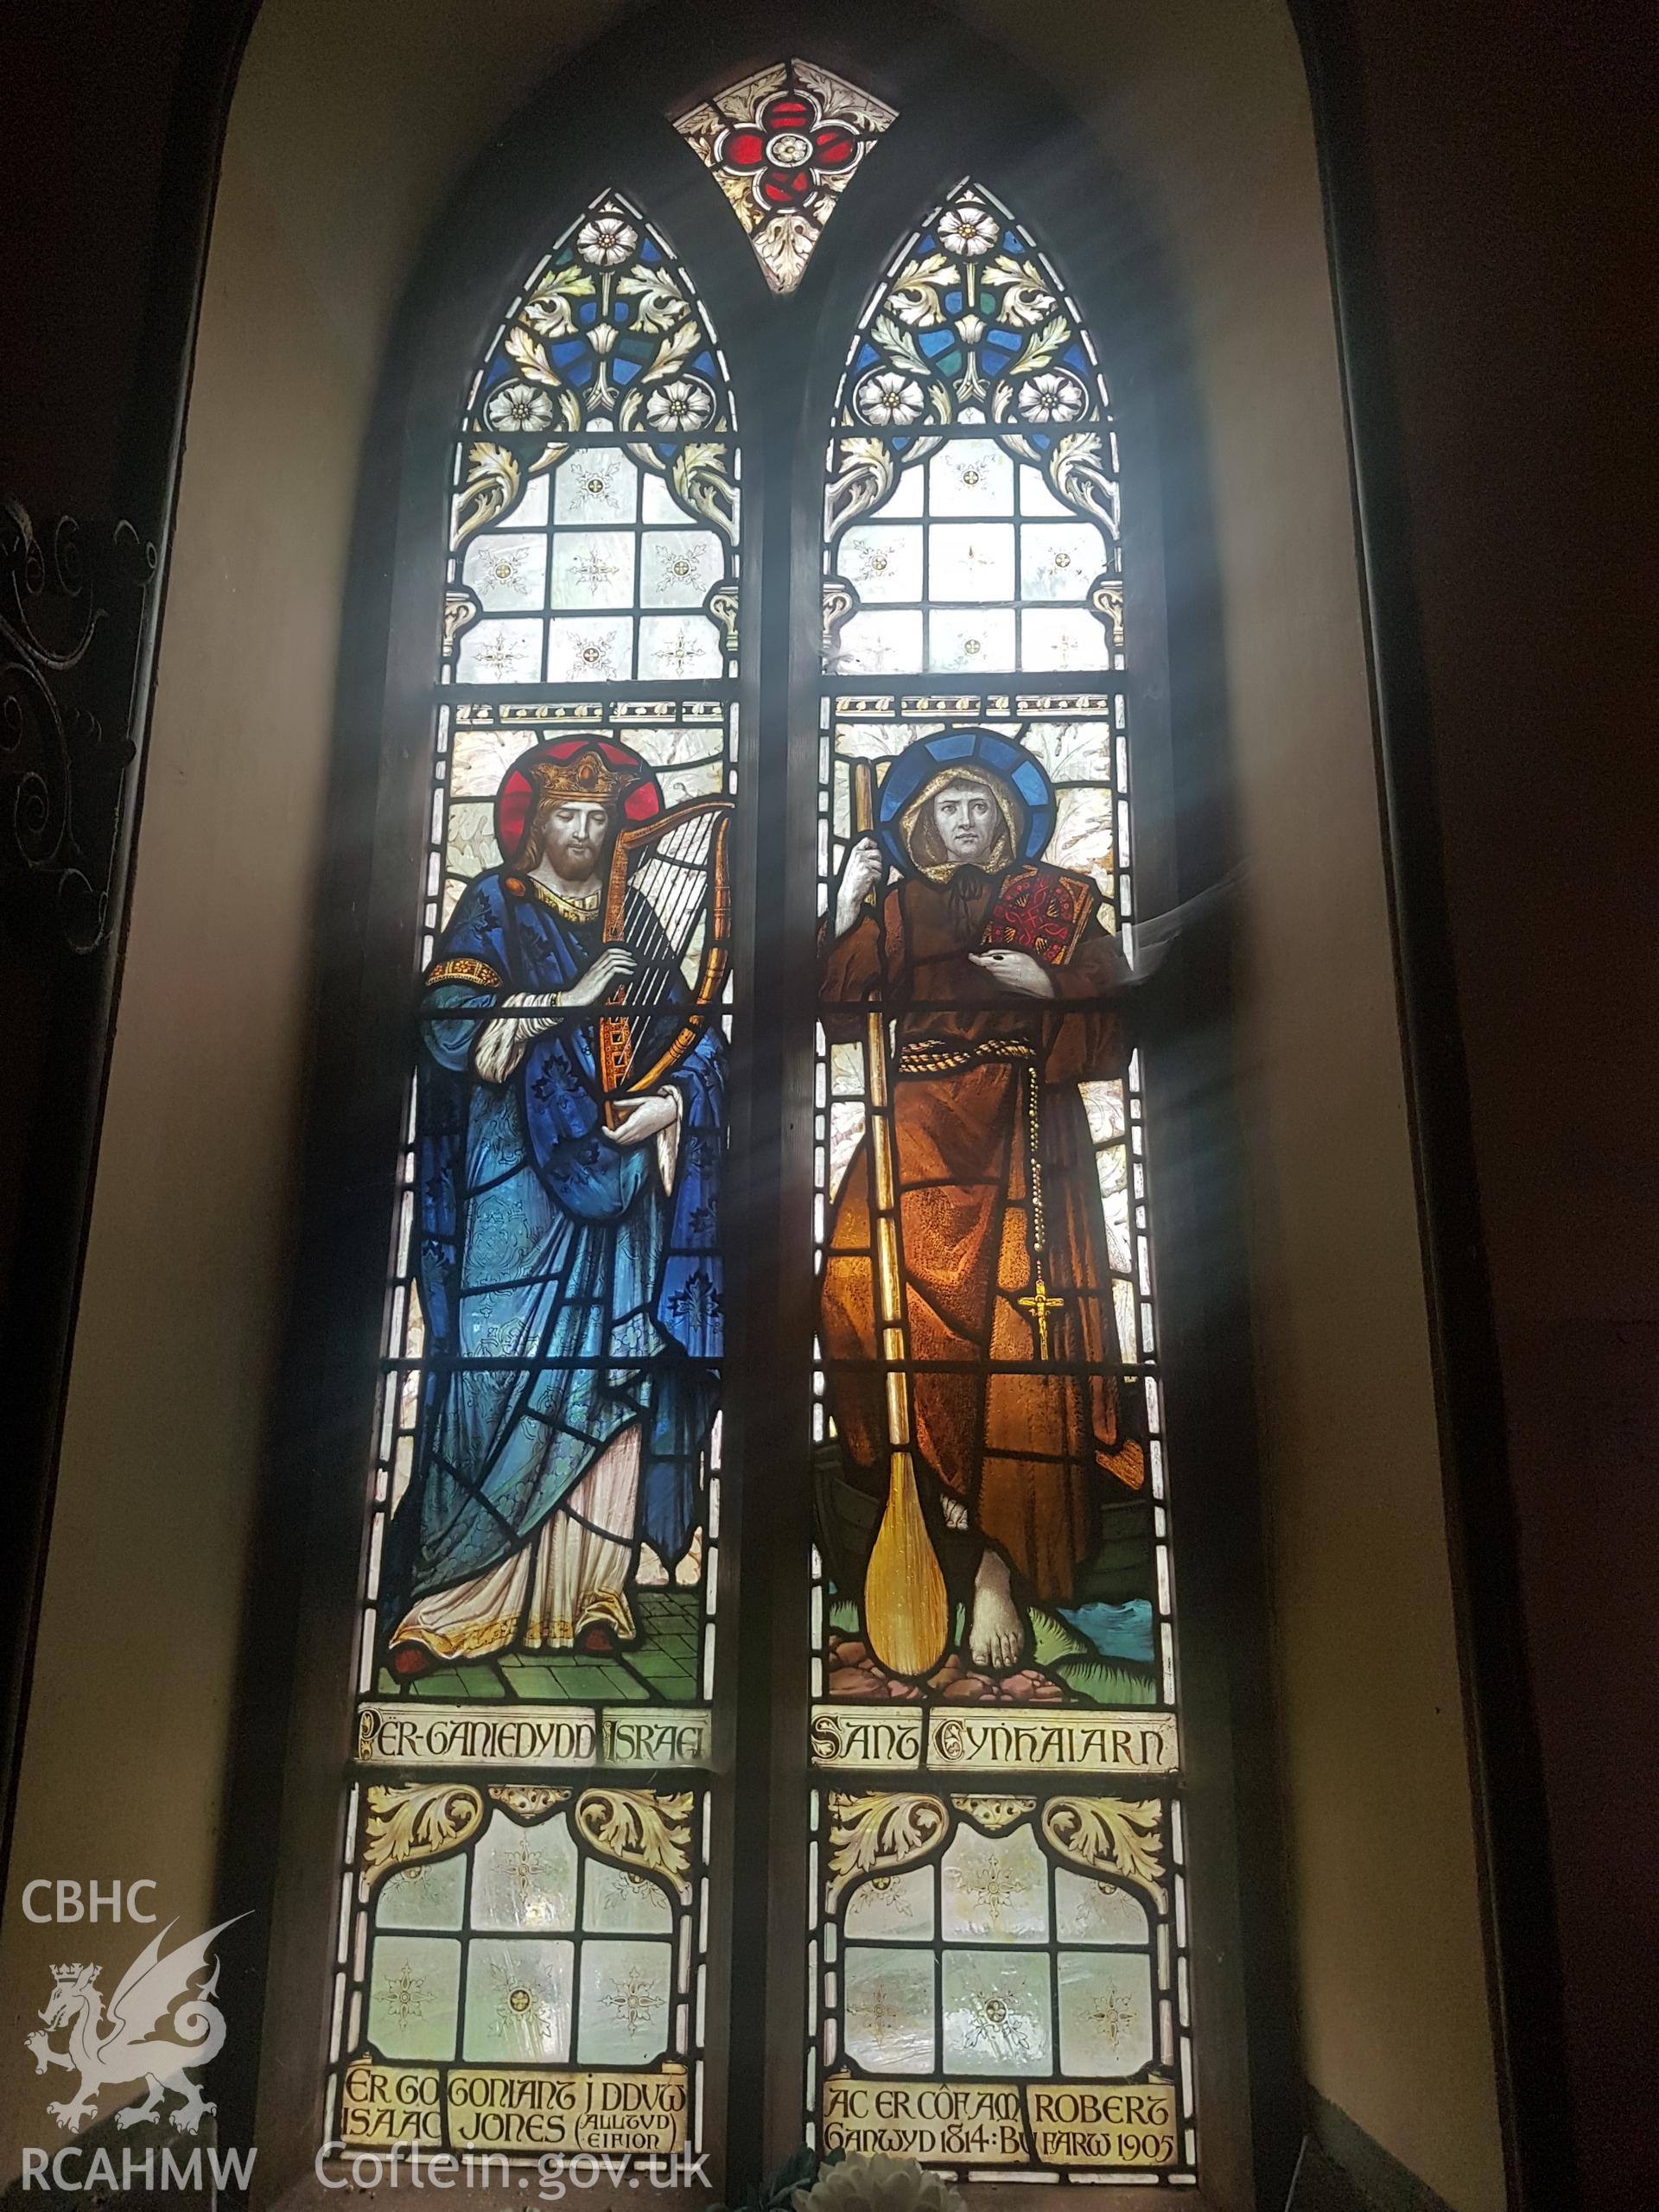 Stained glass windows, one showing St Cynhaiarn. Photographed by Helen Rowe of RCAHMW on 10th October 2020.